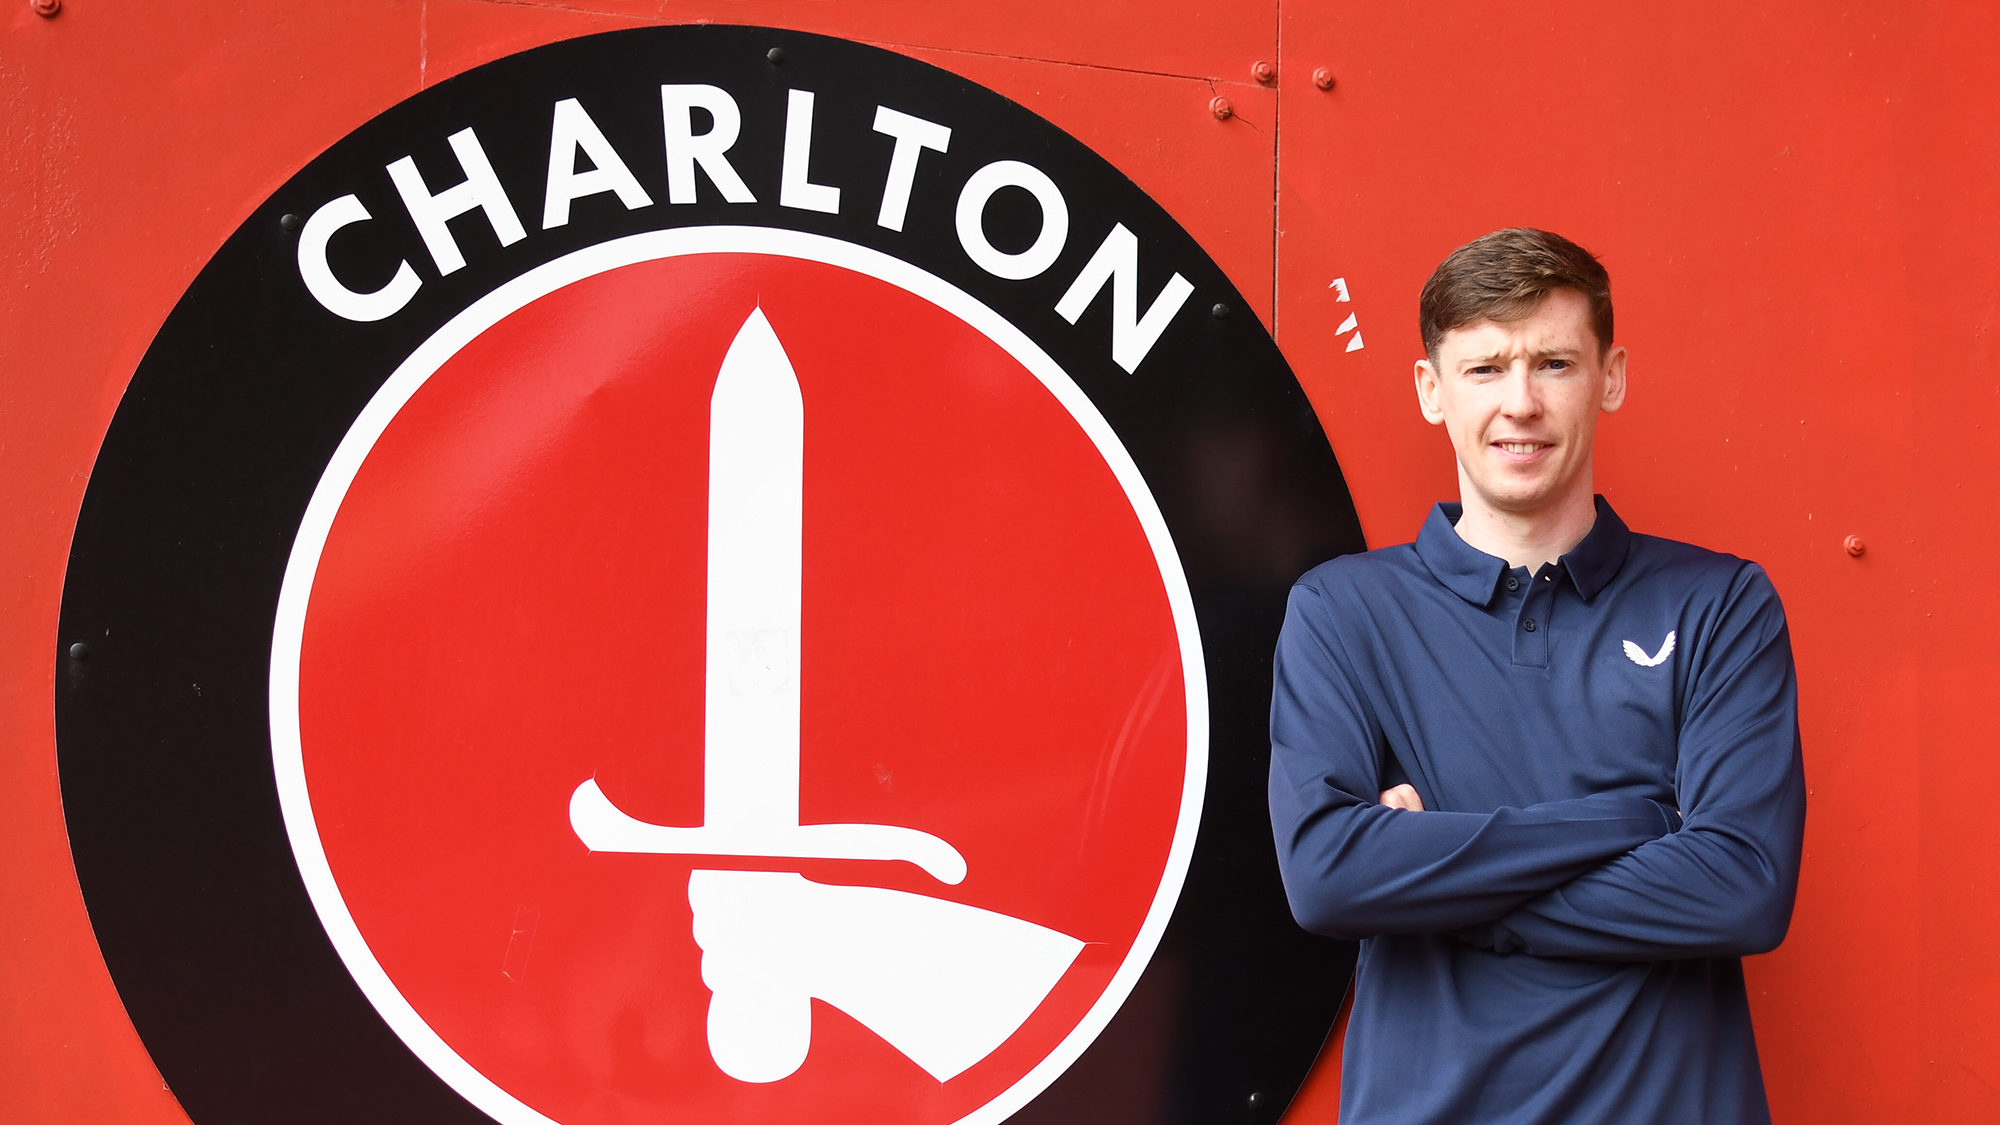 Conor McGrandles pictured next to the Charlton Athletic badge in the Covered End